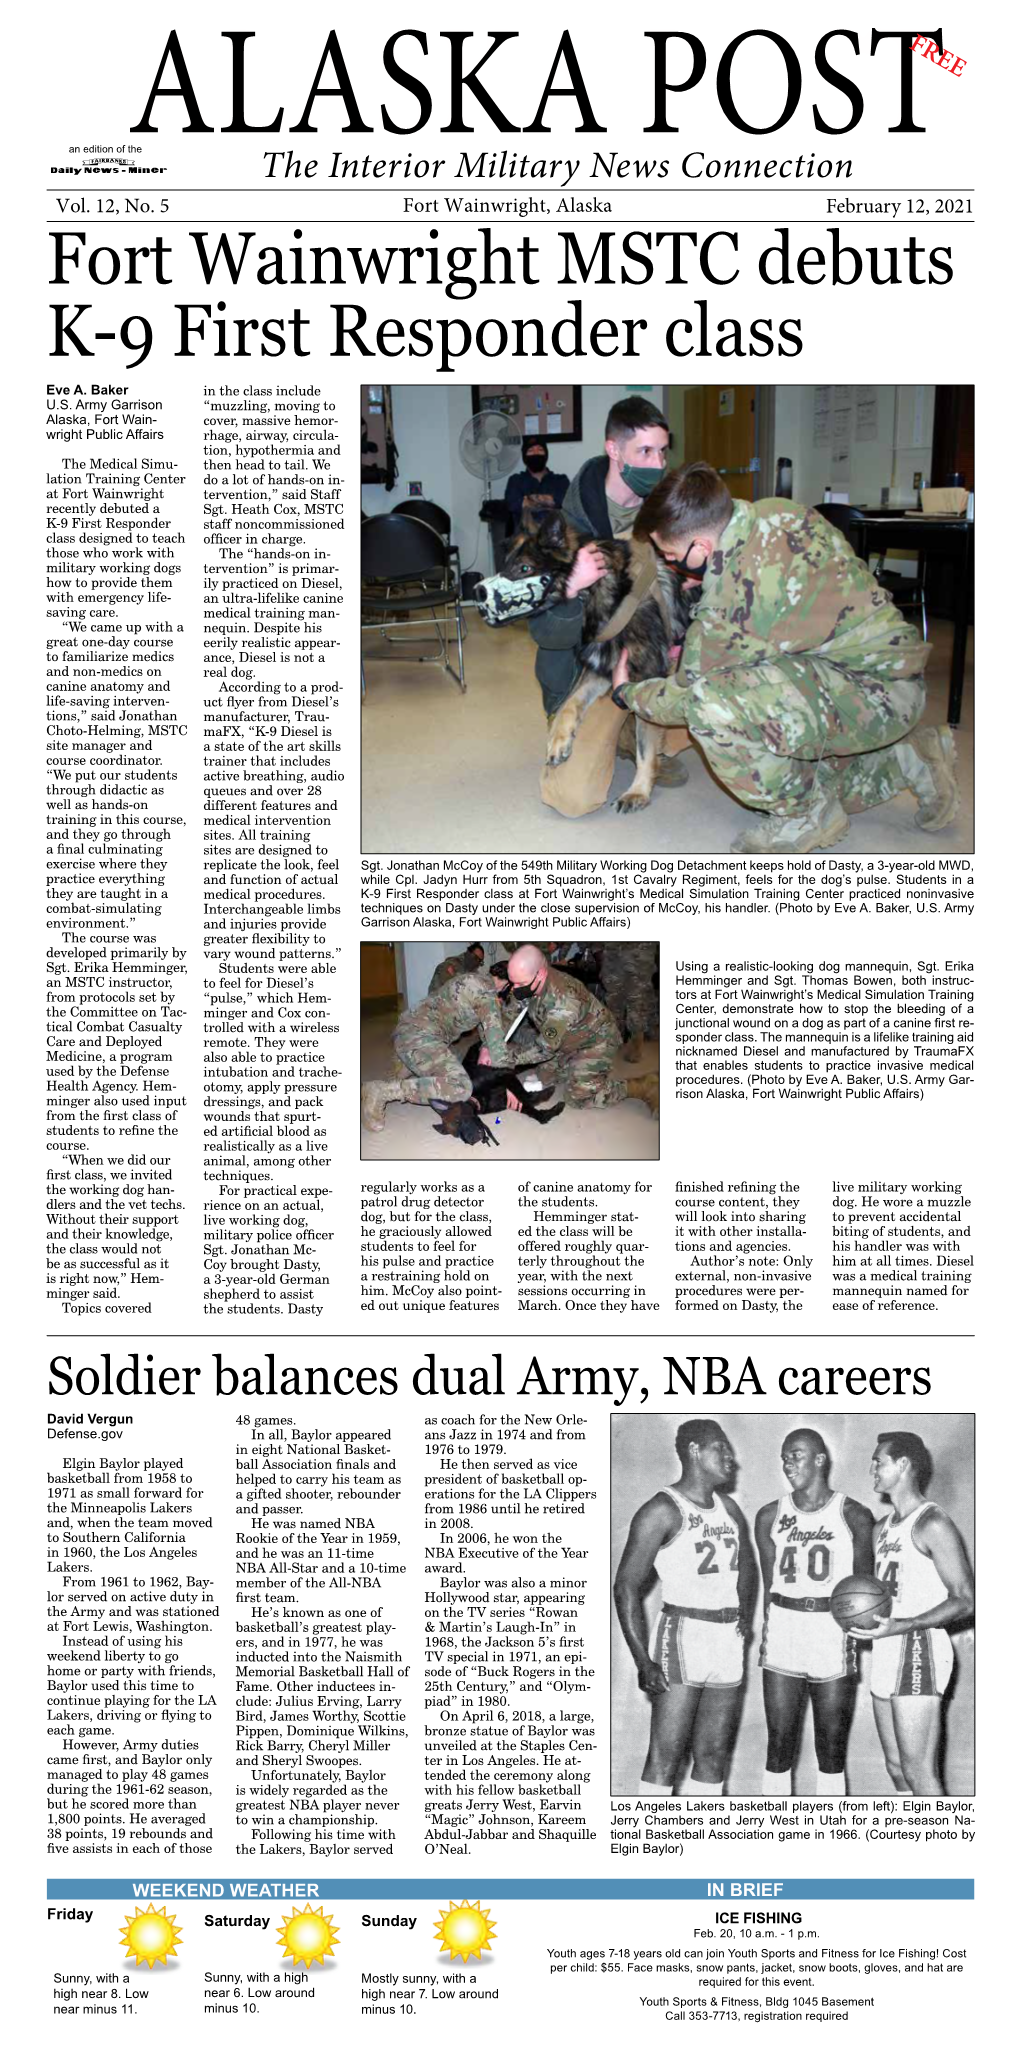 Fort Wainwright MSTC Debuts K-9 First Responder Class Eve A